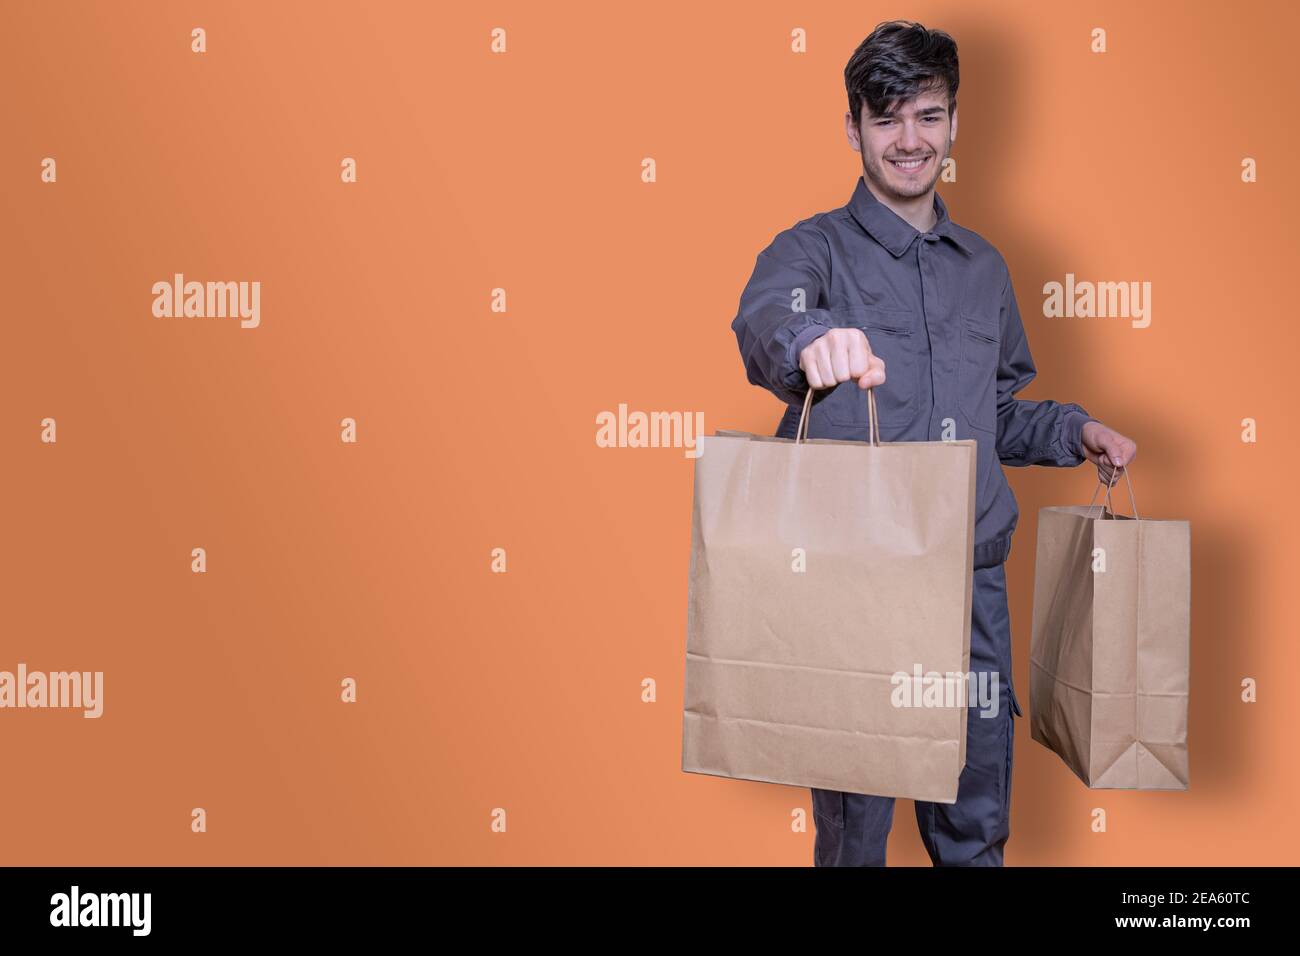 Delivery man with paper bags in his hands delivering the order, dressed in uniform and smiling Stock Photo